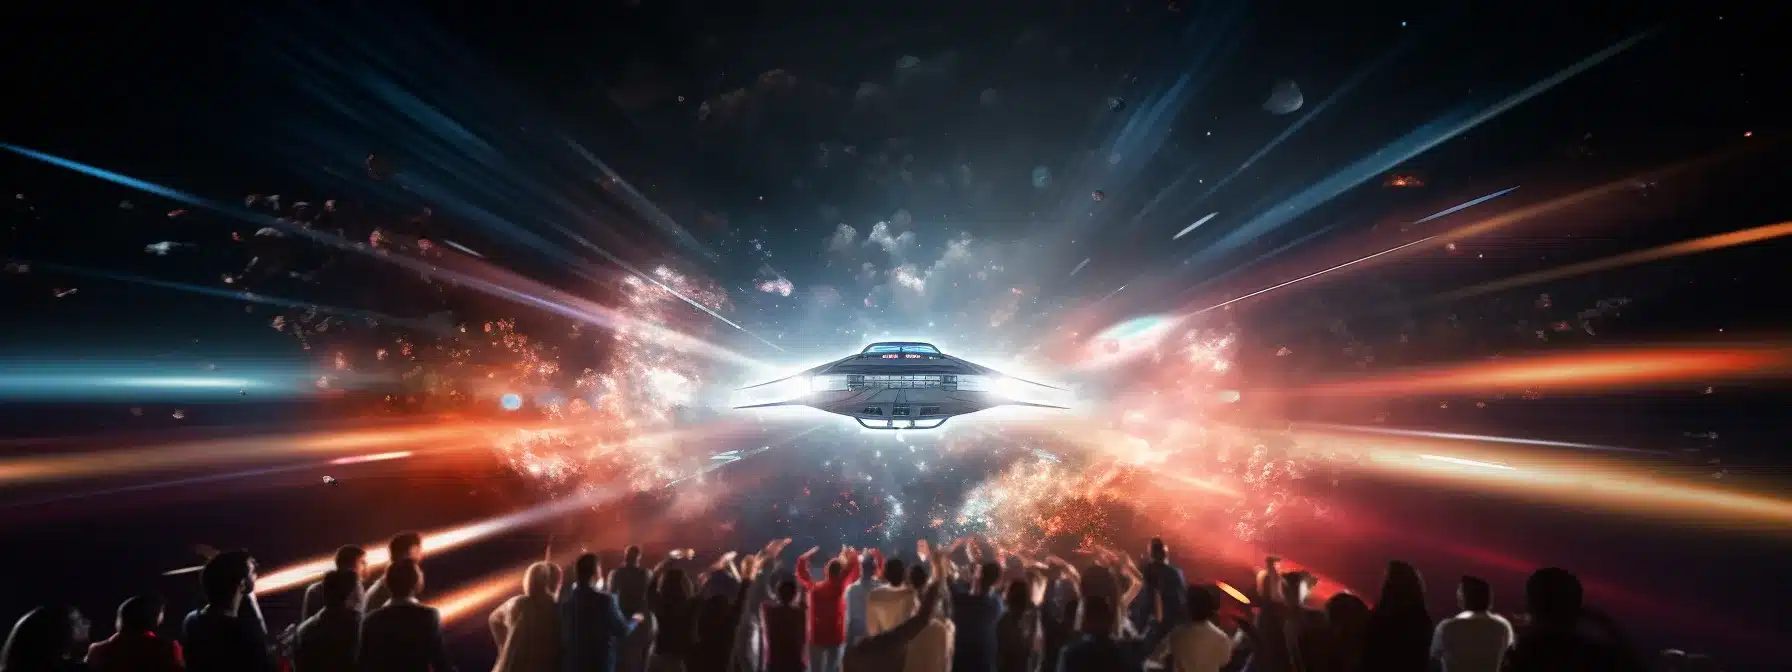 A Spaceship Soaring Through The Cosmos, Guided By Google Analytics And Fueled By Hubspot, With A Crew Of Target Audience Members Dancing To The Rhythm Of Analytics And Feedback.